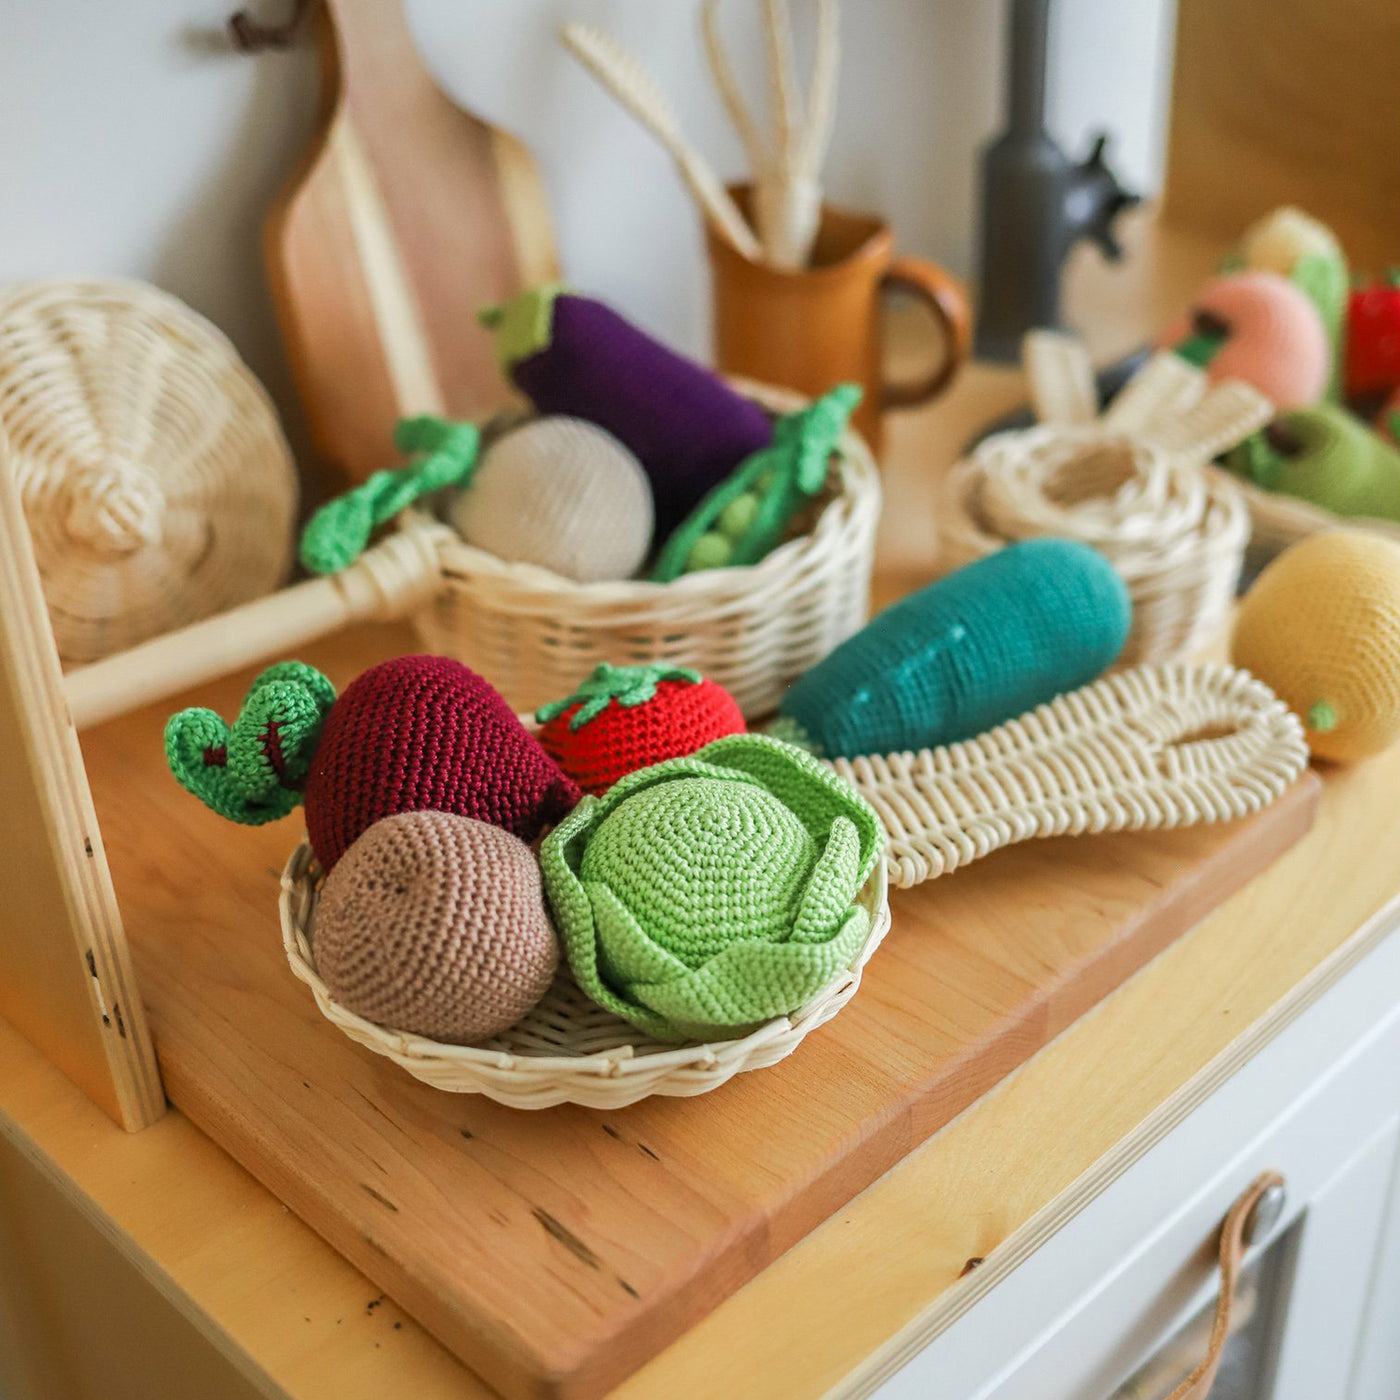 The Complete Vegetable Toy Set - 12 pieces